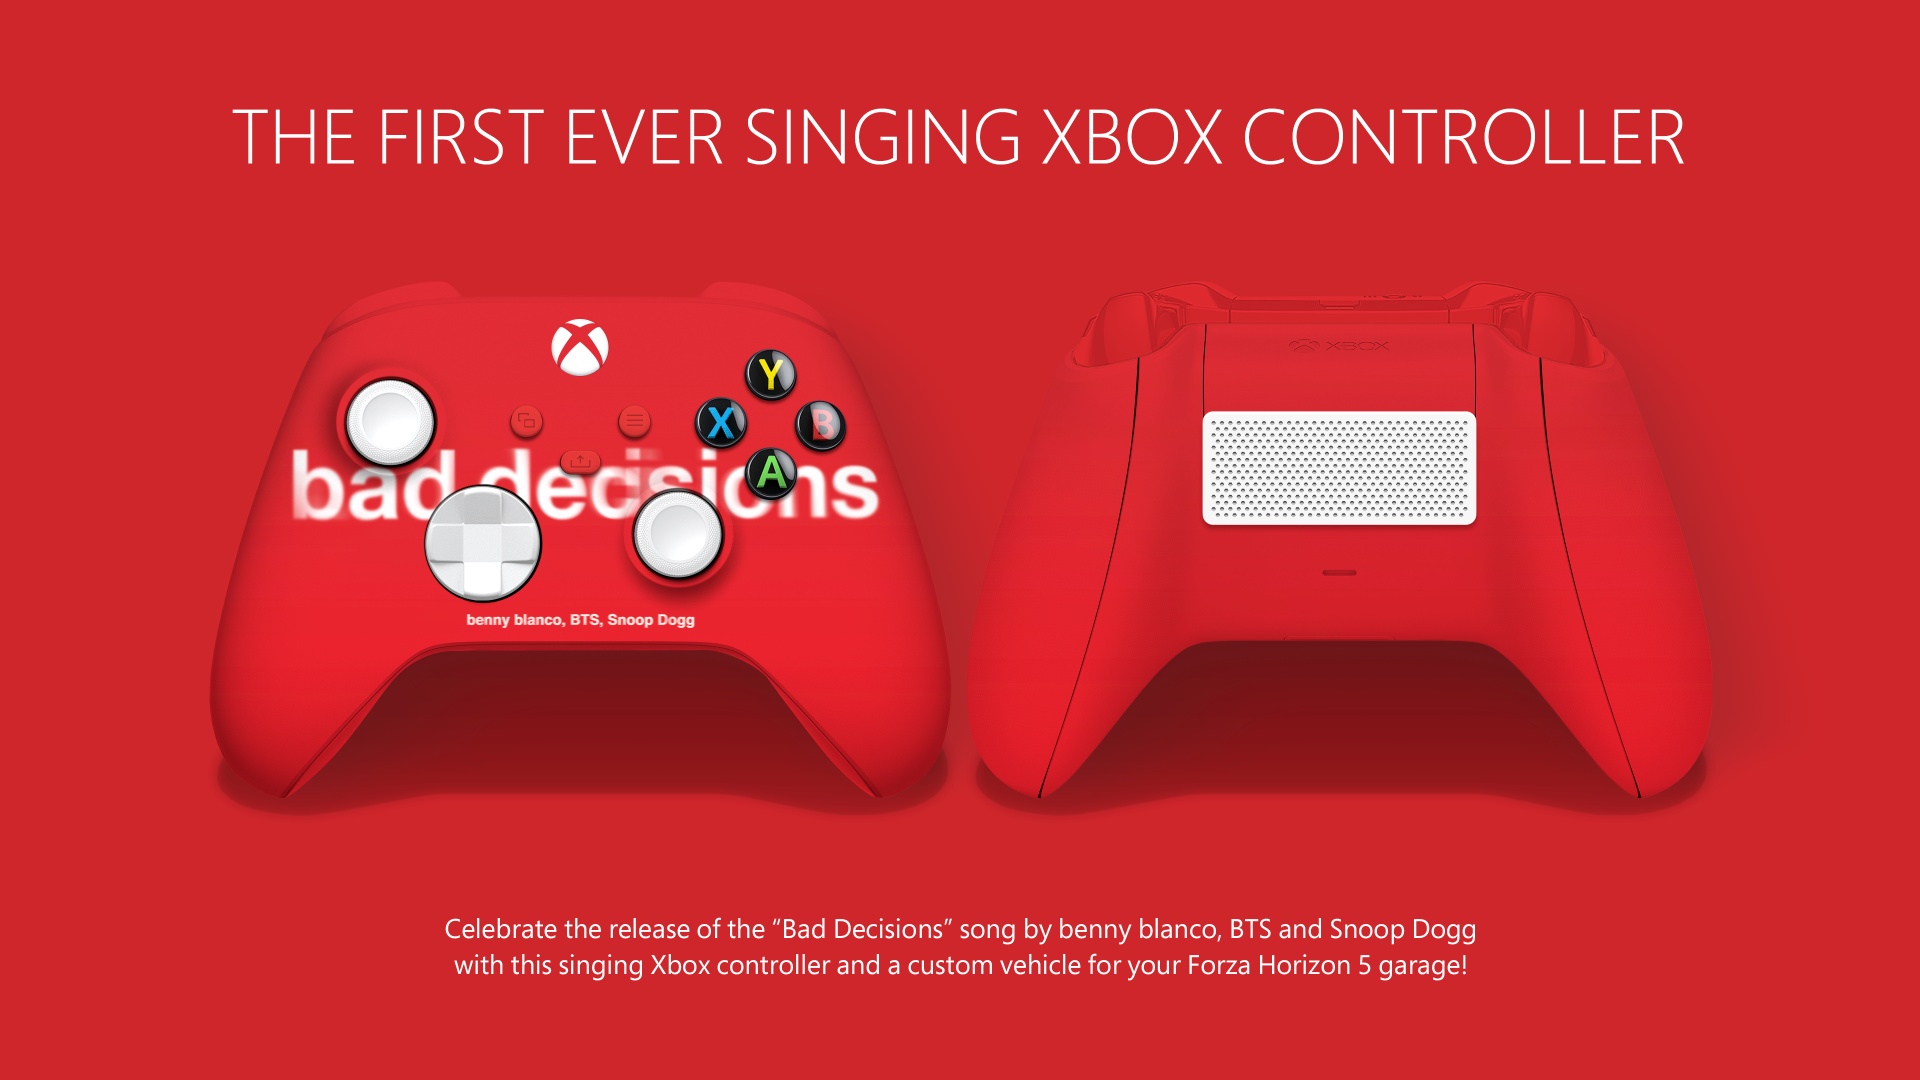 benny blanco, BTS, and Snoop Dogg Reveal First-Ever Xbox Singing Controller  - Xbox Wire